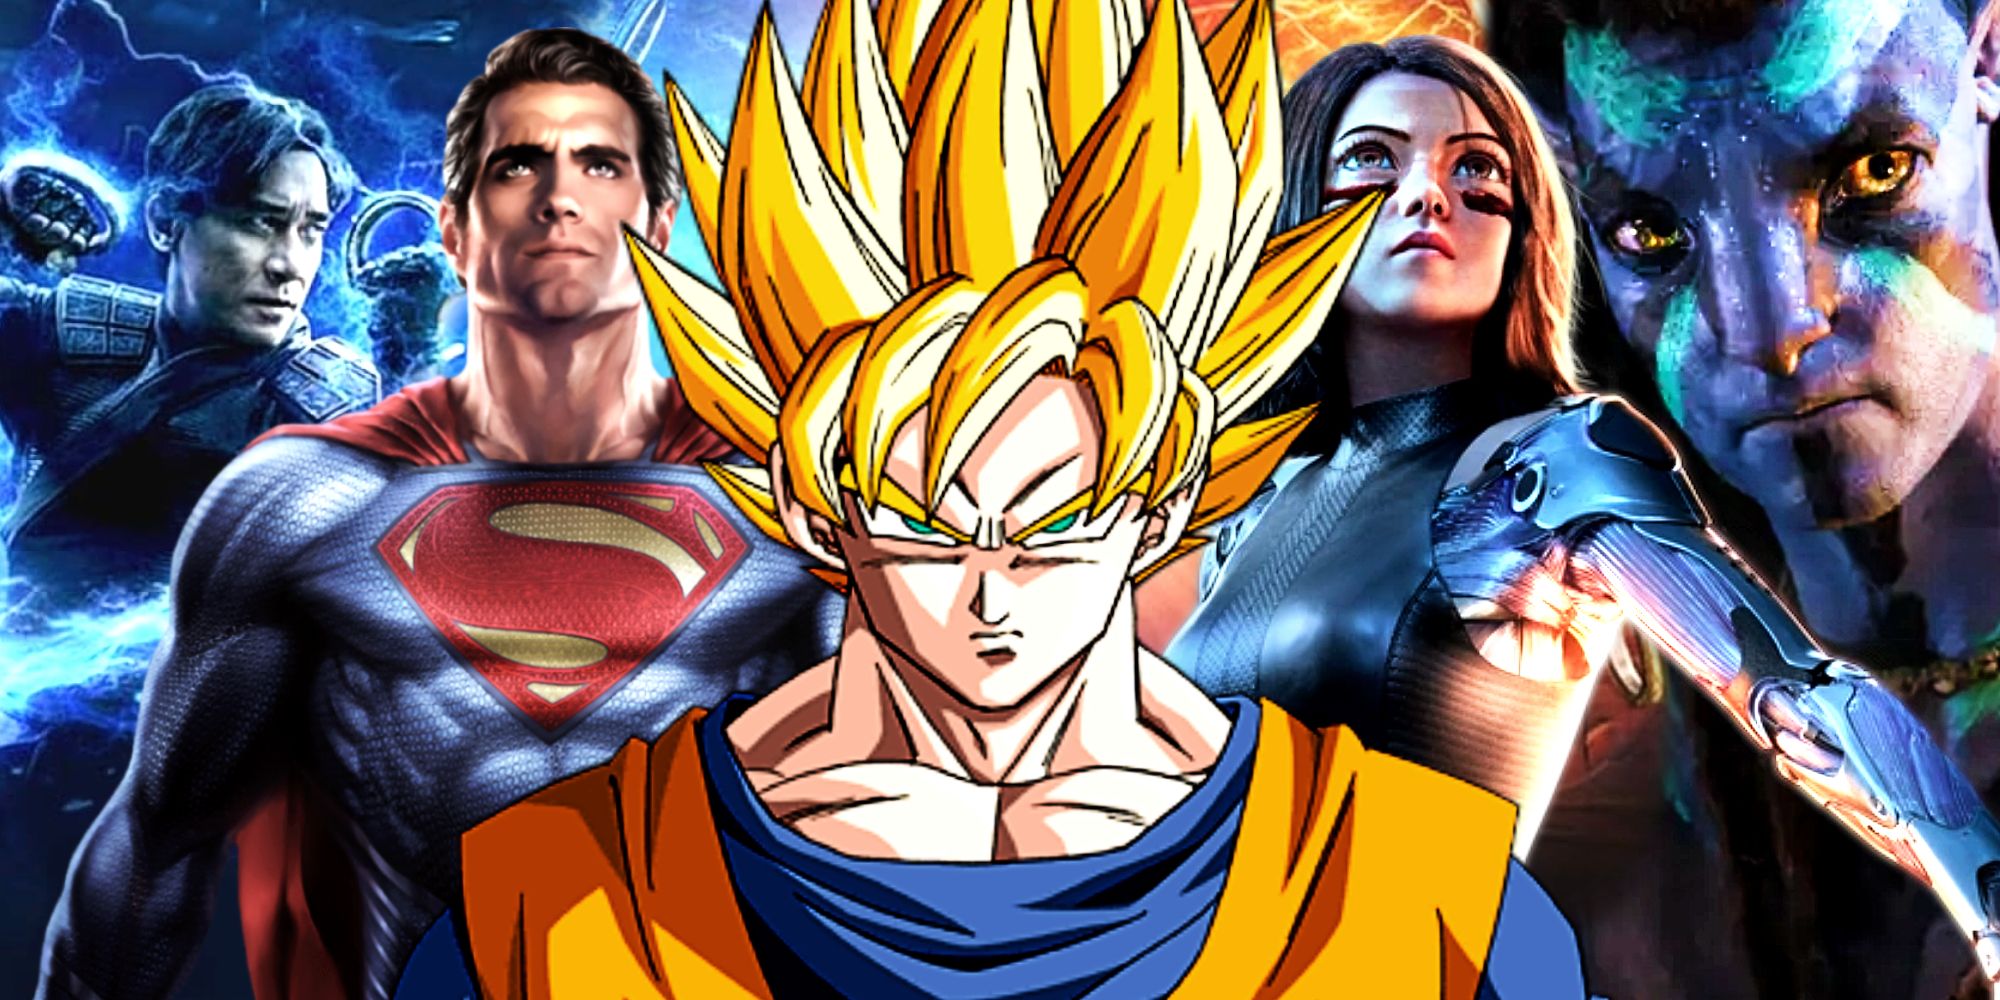 Everything A Proper Live-Action Dragon Ball Movie Needs Already Exists